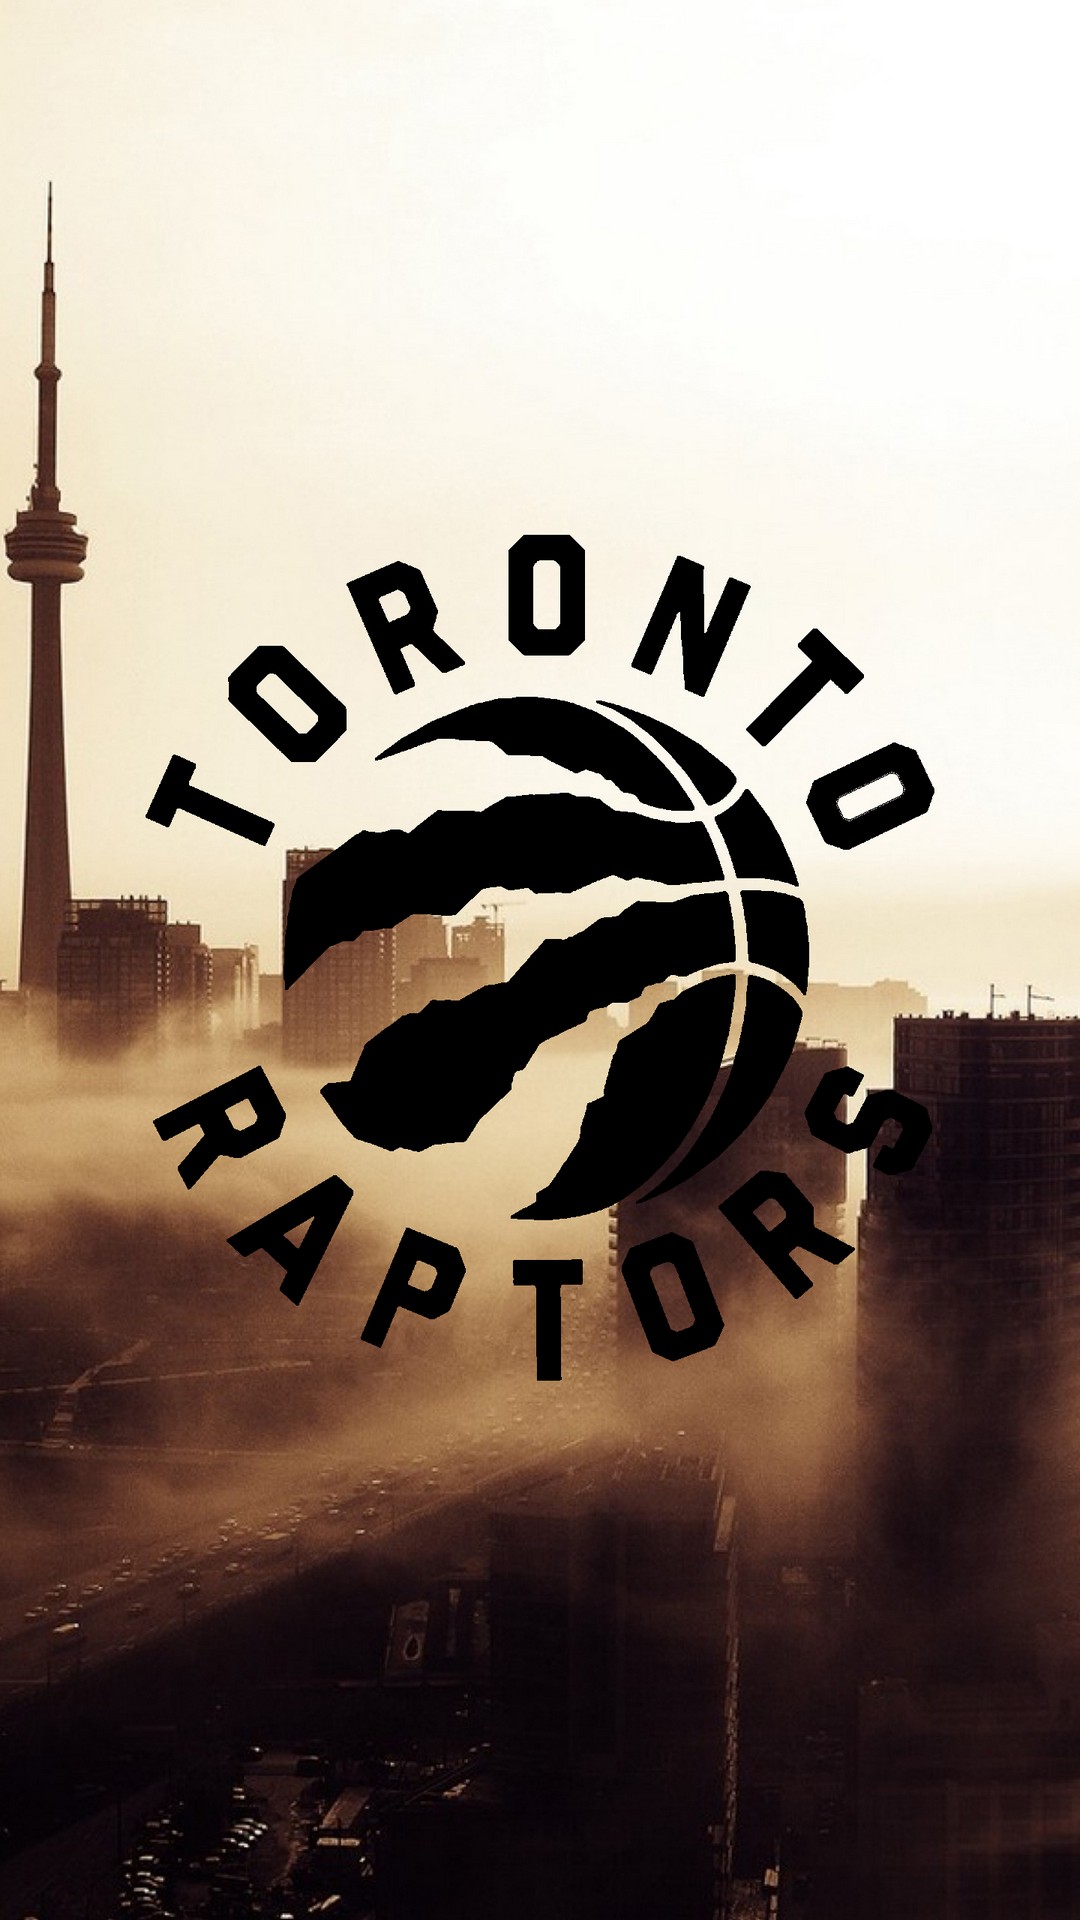 Toronto Raptors Android Wallpaper with image resolution 1080x1920 pixel. You can make this wallpaper for your Android backgrounds, Tablet, Smartphones Screensavers and Mobile Phone Lock Screen